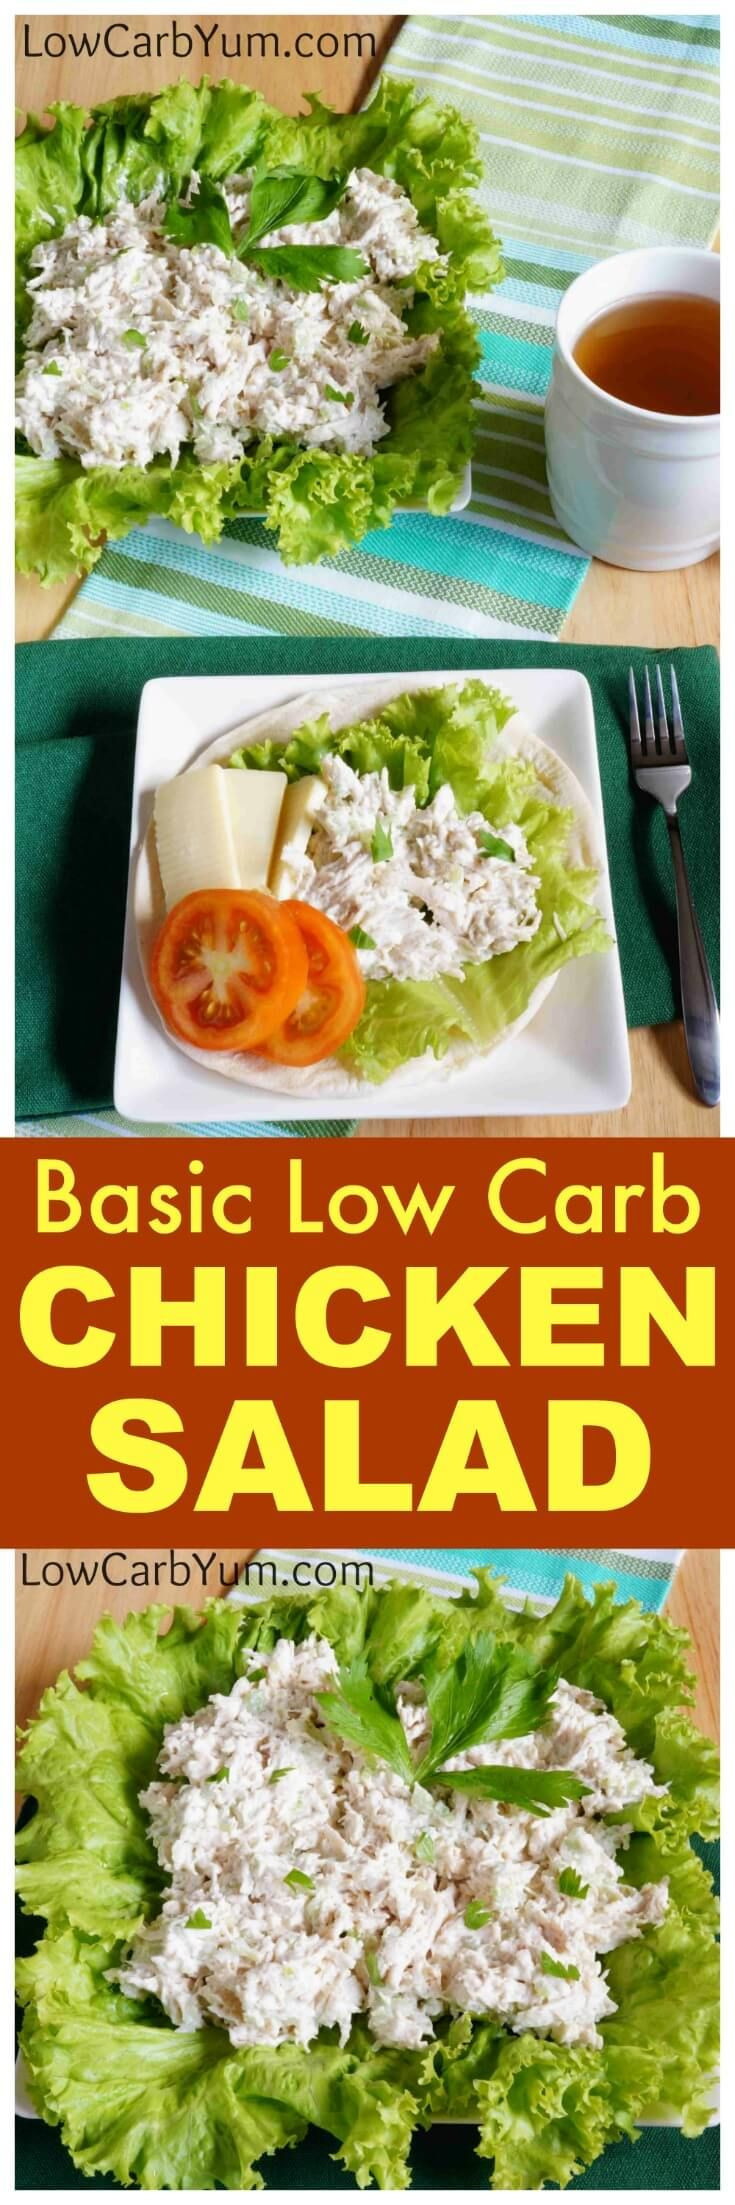 Low Carb Chicken Salad Recipe
 A basic low carb chicken salad recipe that s quick to make